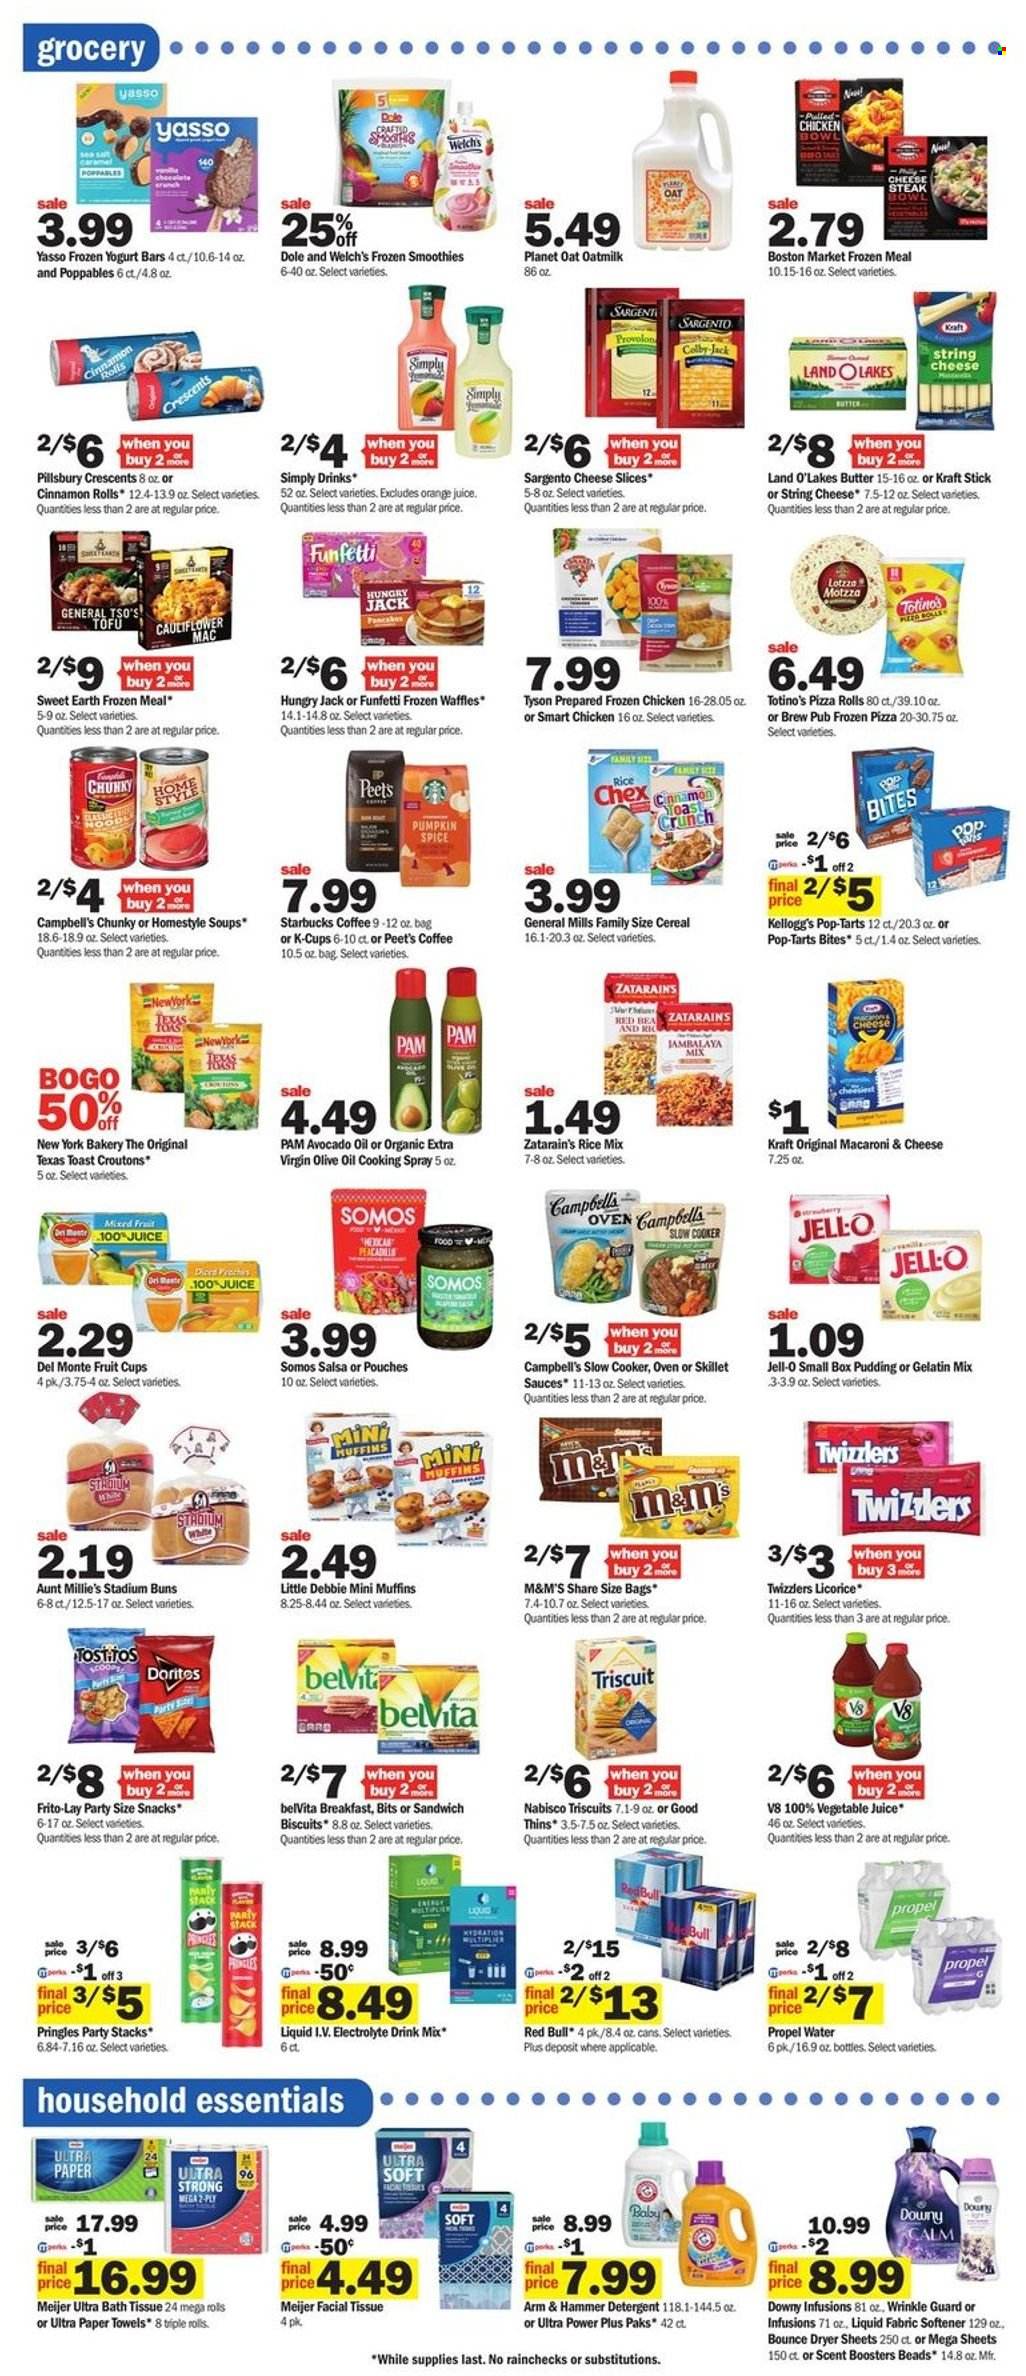 thumbnail - Meijer Flyer - 09/25/2022 - 10/01/2022 - Sales products - pizza rolls, buns, cinnamon roll, muffin, waffles, Dole, fruit cup, Welch's, Campbell's, macaroni & cheese, pizza, pancakes, Pillsbury, Kraft®, Colby cheese, sliced cheese, string cheese, tofu, Sargento, pudding, oat milk, butter, frozen smoothie, chocolate, snack, M&M's, Kellogg's, biscuit, Pop-Tarts, Pringles, Thins, Frito-Lay, ARM & HAMMER, croutons, Jell-O, Del Monte, cereals, belVita, spice, salsa, avocado oil, cooking spray, extra virgin olive oil, olive oil, orange juice, juice, Red Bull, vegetable juice, smoothie, coffee, Starbucks, coffee capsules, K-Cups, bath tissue, kitchen towels, paper towels, detergent, fabric softener, Bounce, dryer sheets, scent booster, Downy Laundry, oven, slow cooker, gelatin. Page 3.